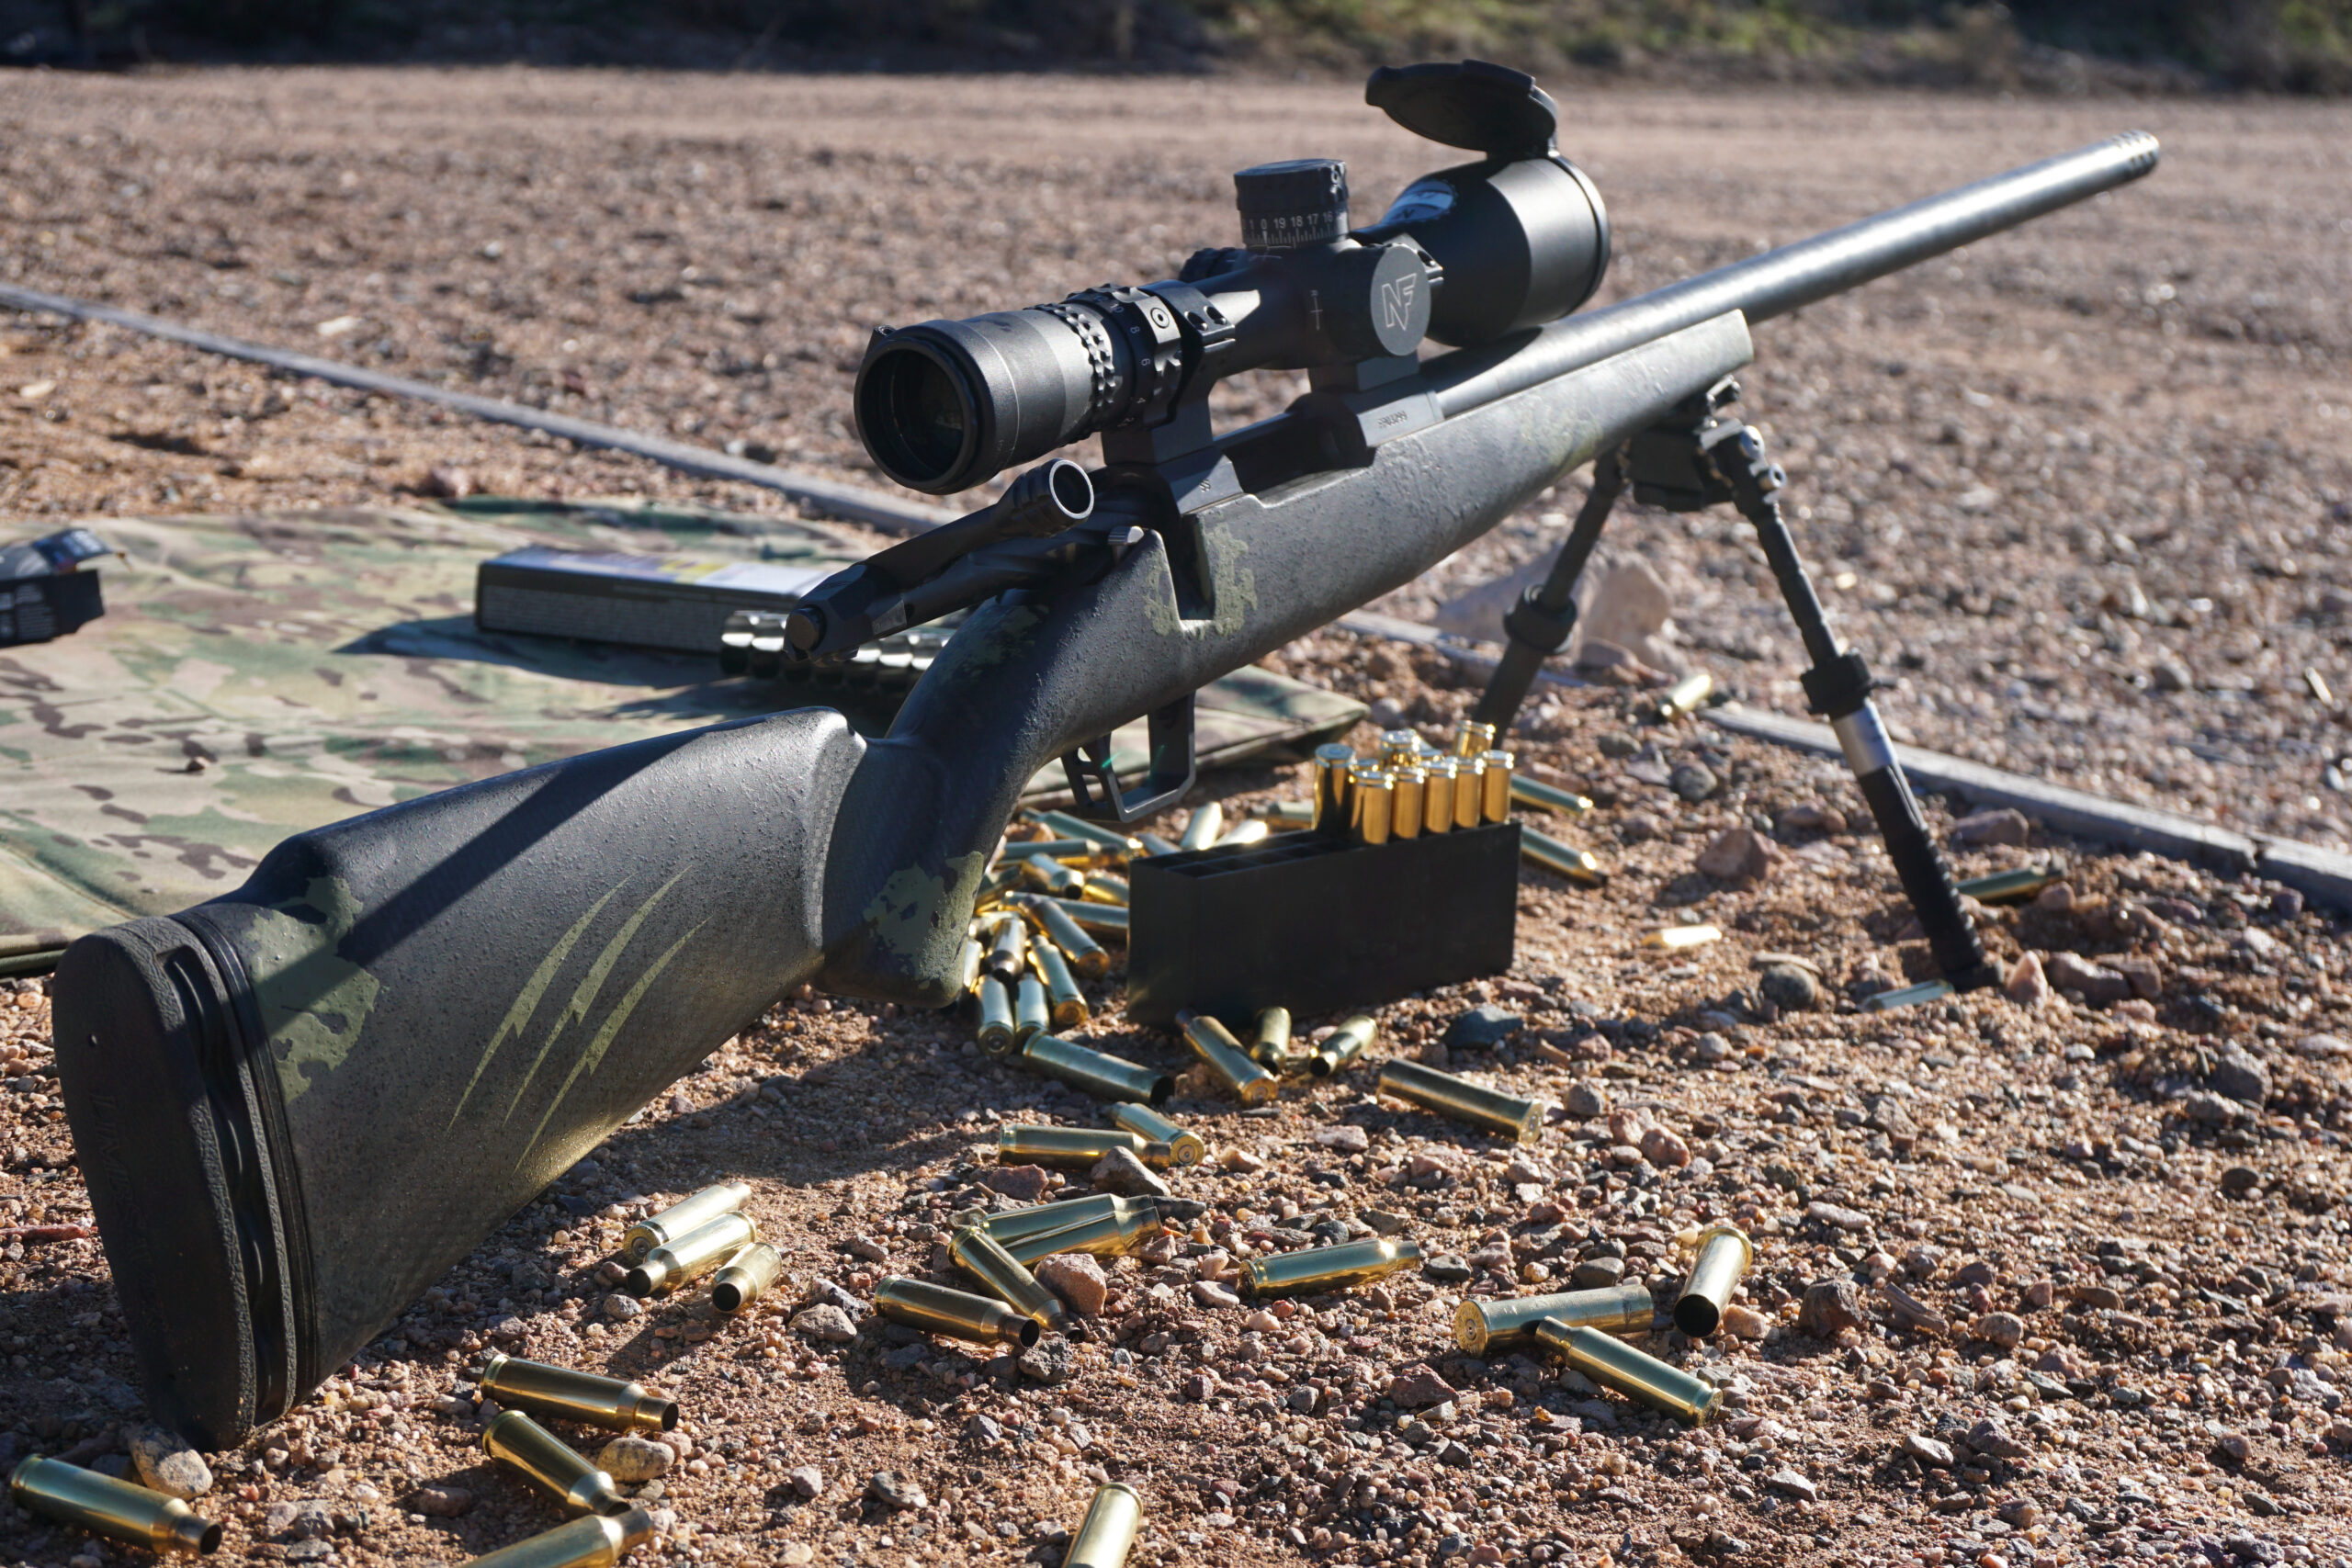 The Fierce Firearms Carbon Rogue on a bipod.